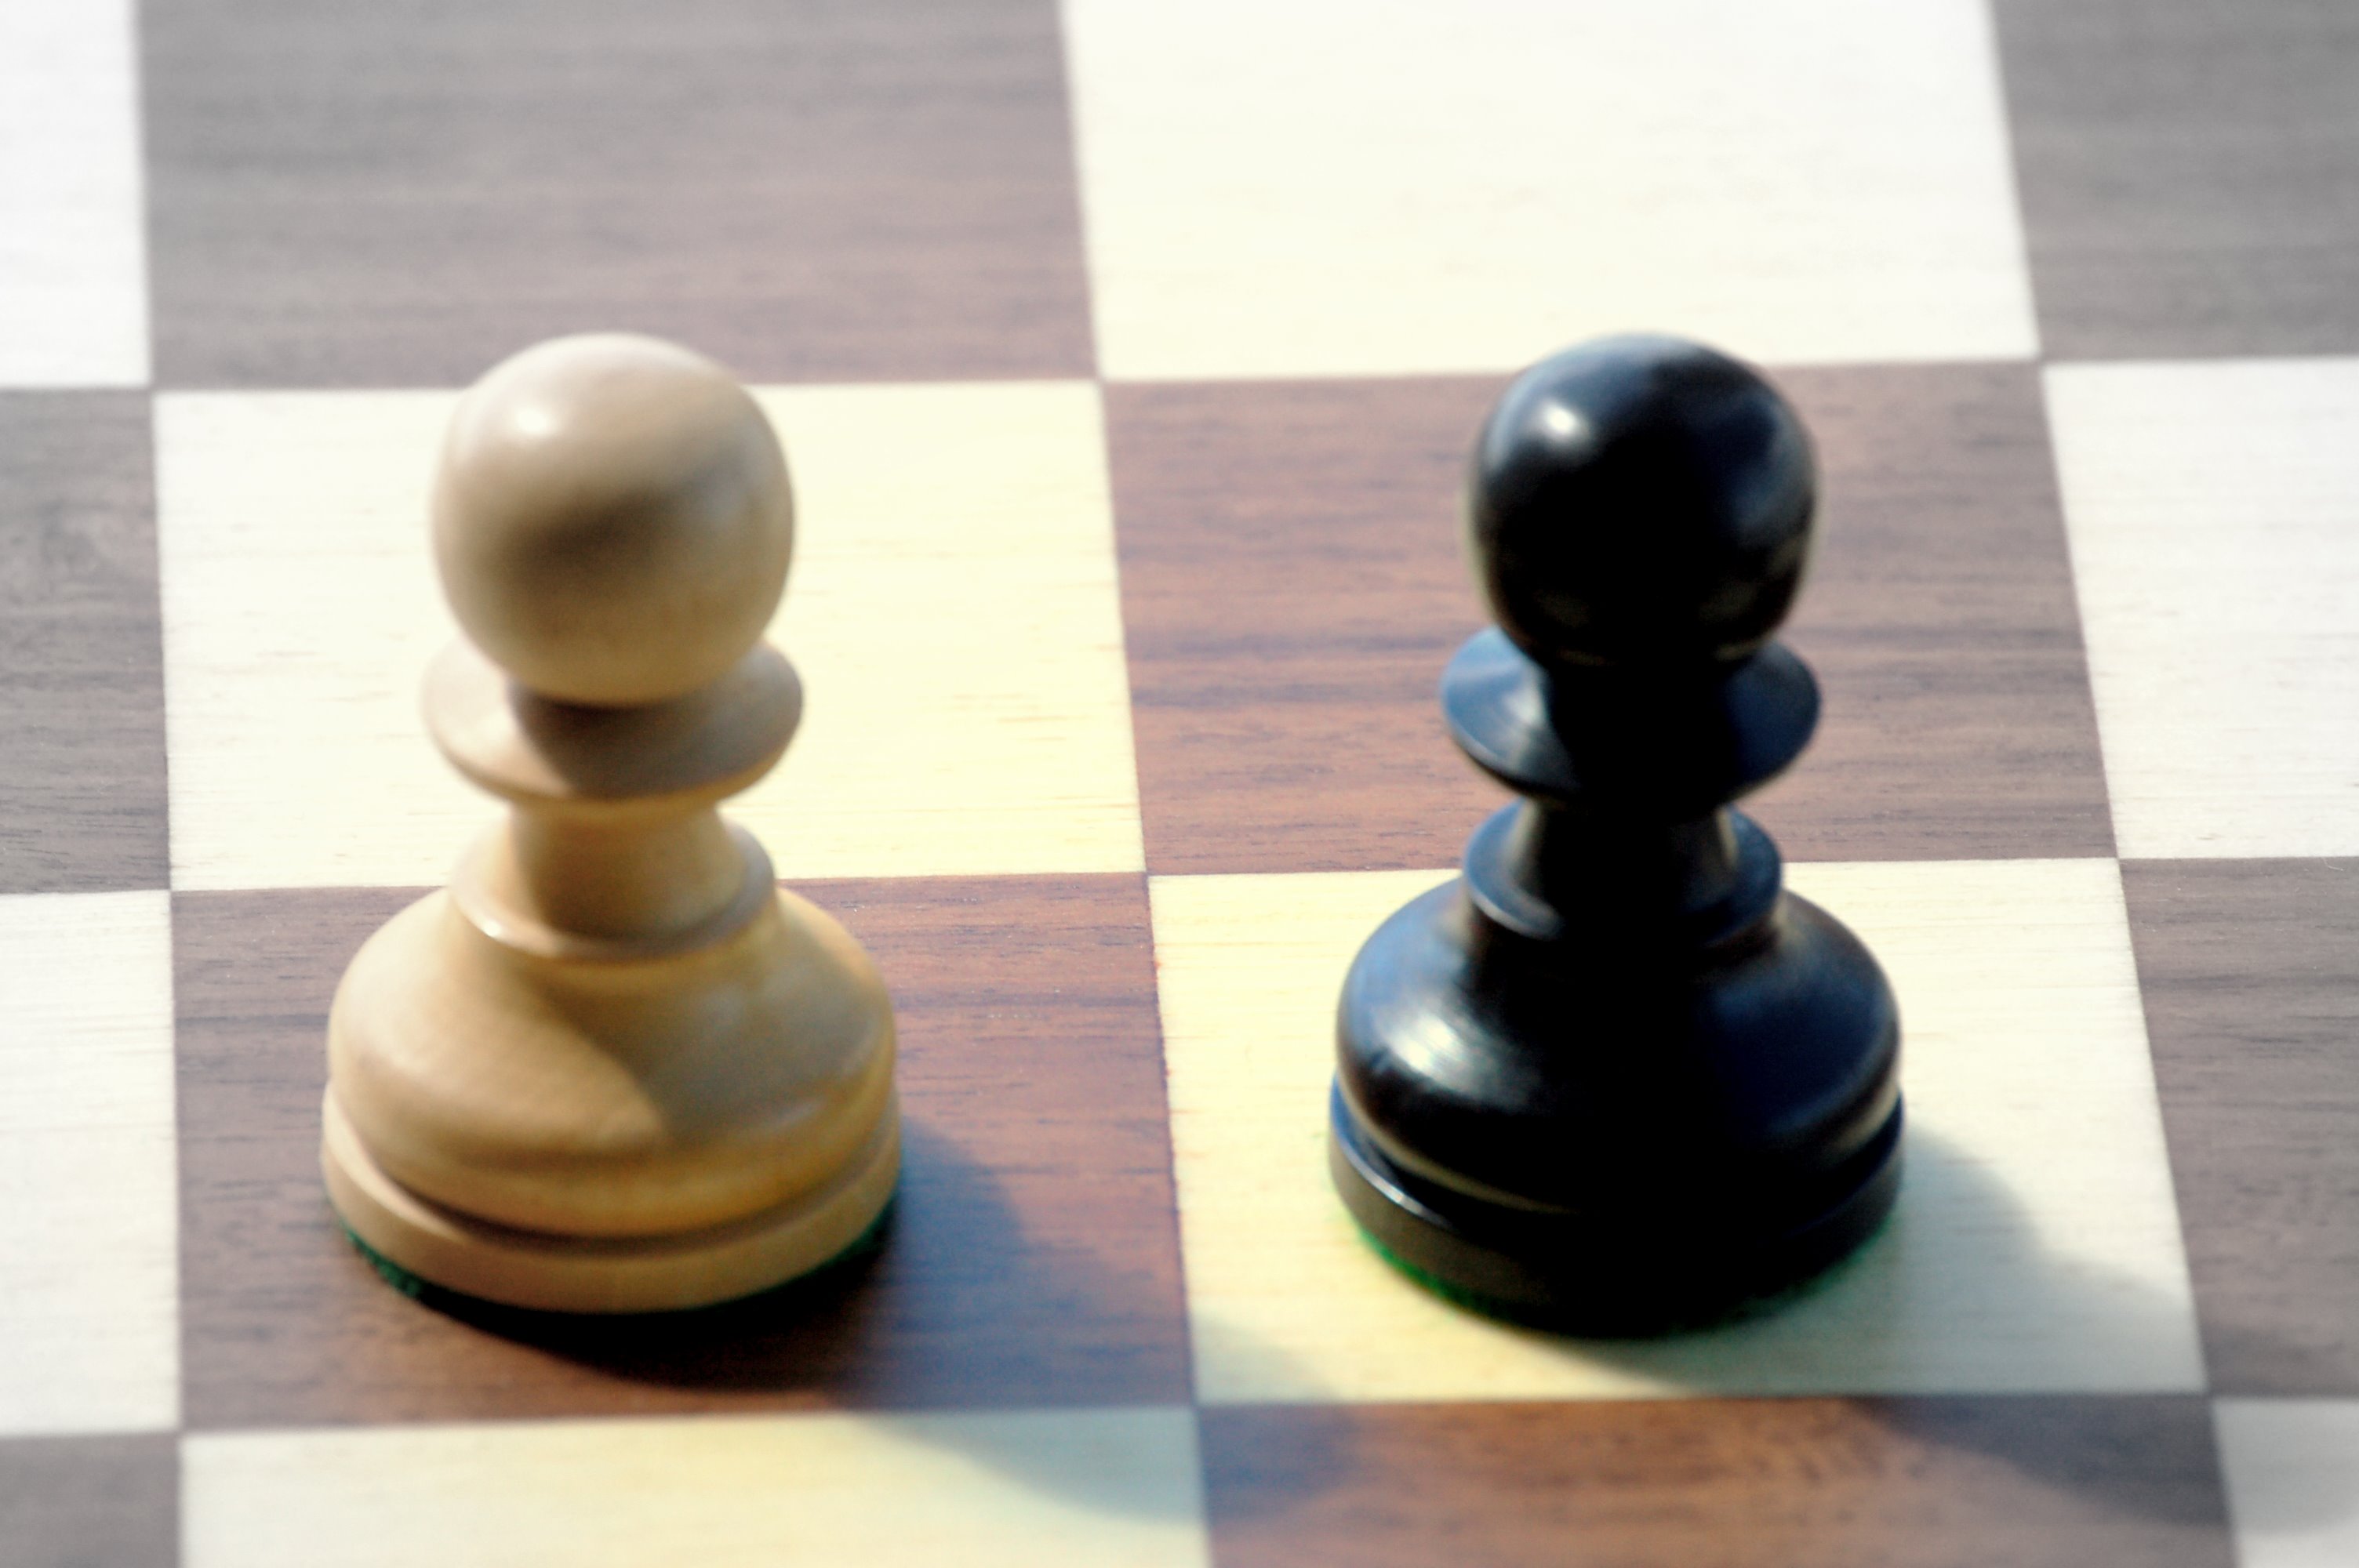 Are We God's Pawns? – The Two Cities